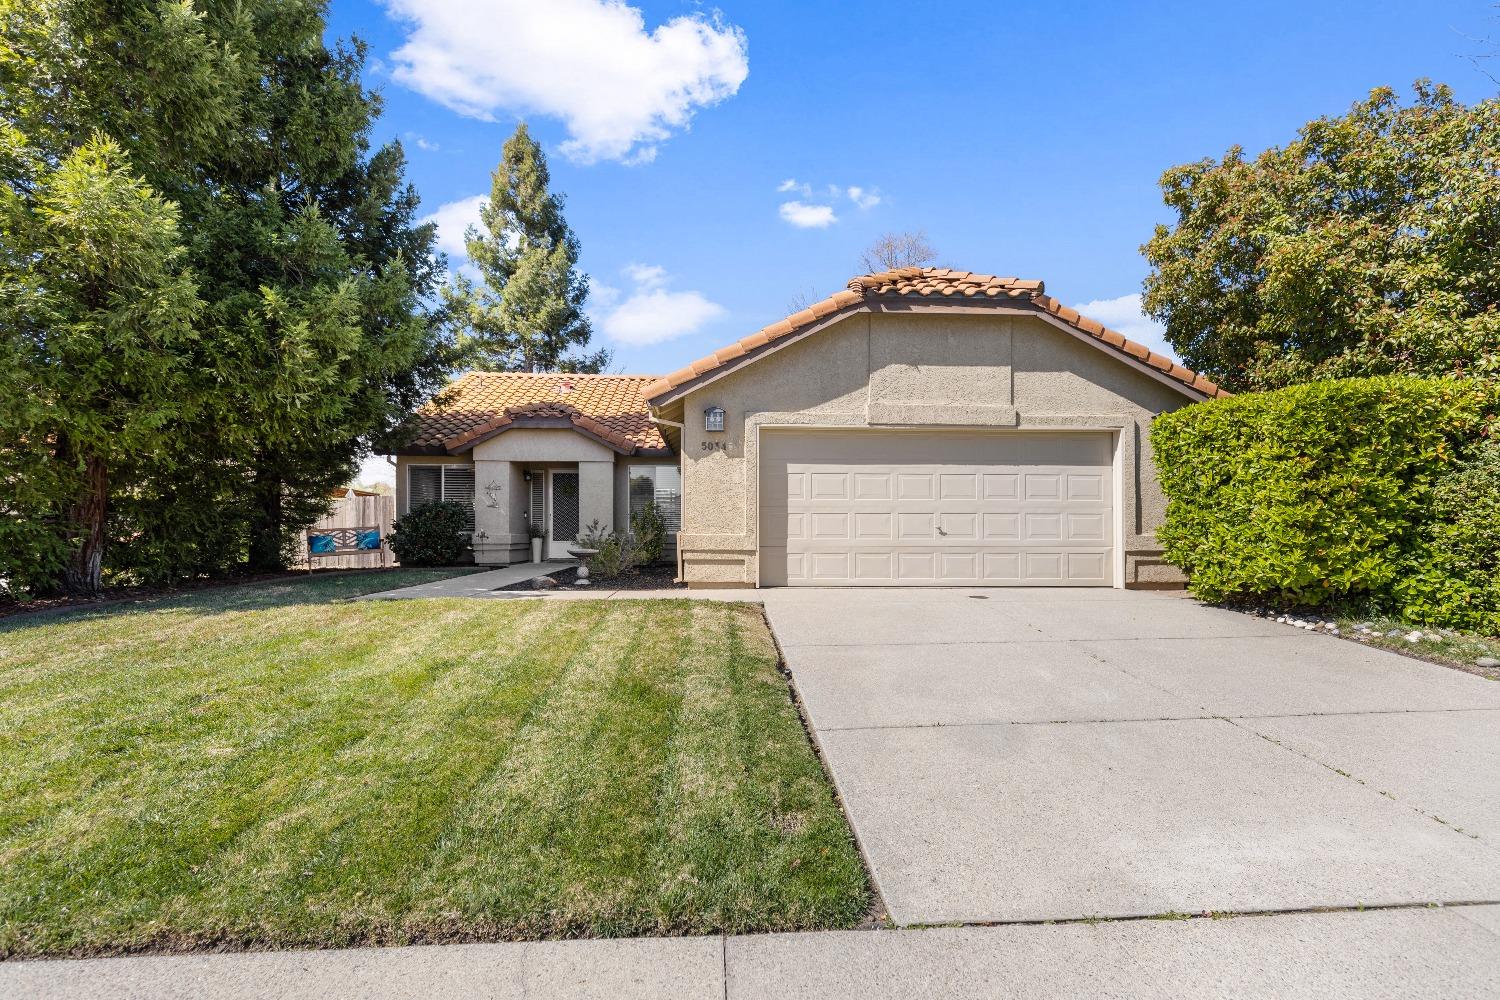 Photo of 5034 Charter Rd in Rocklin, CA